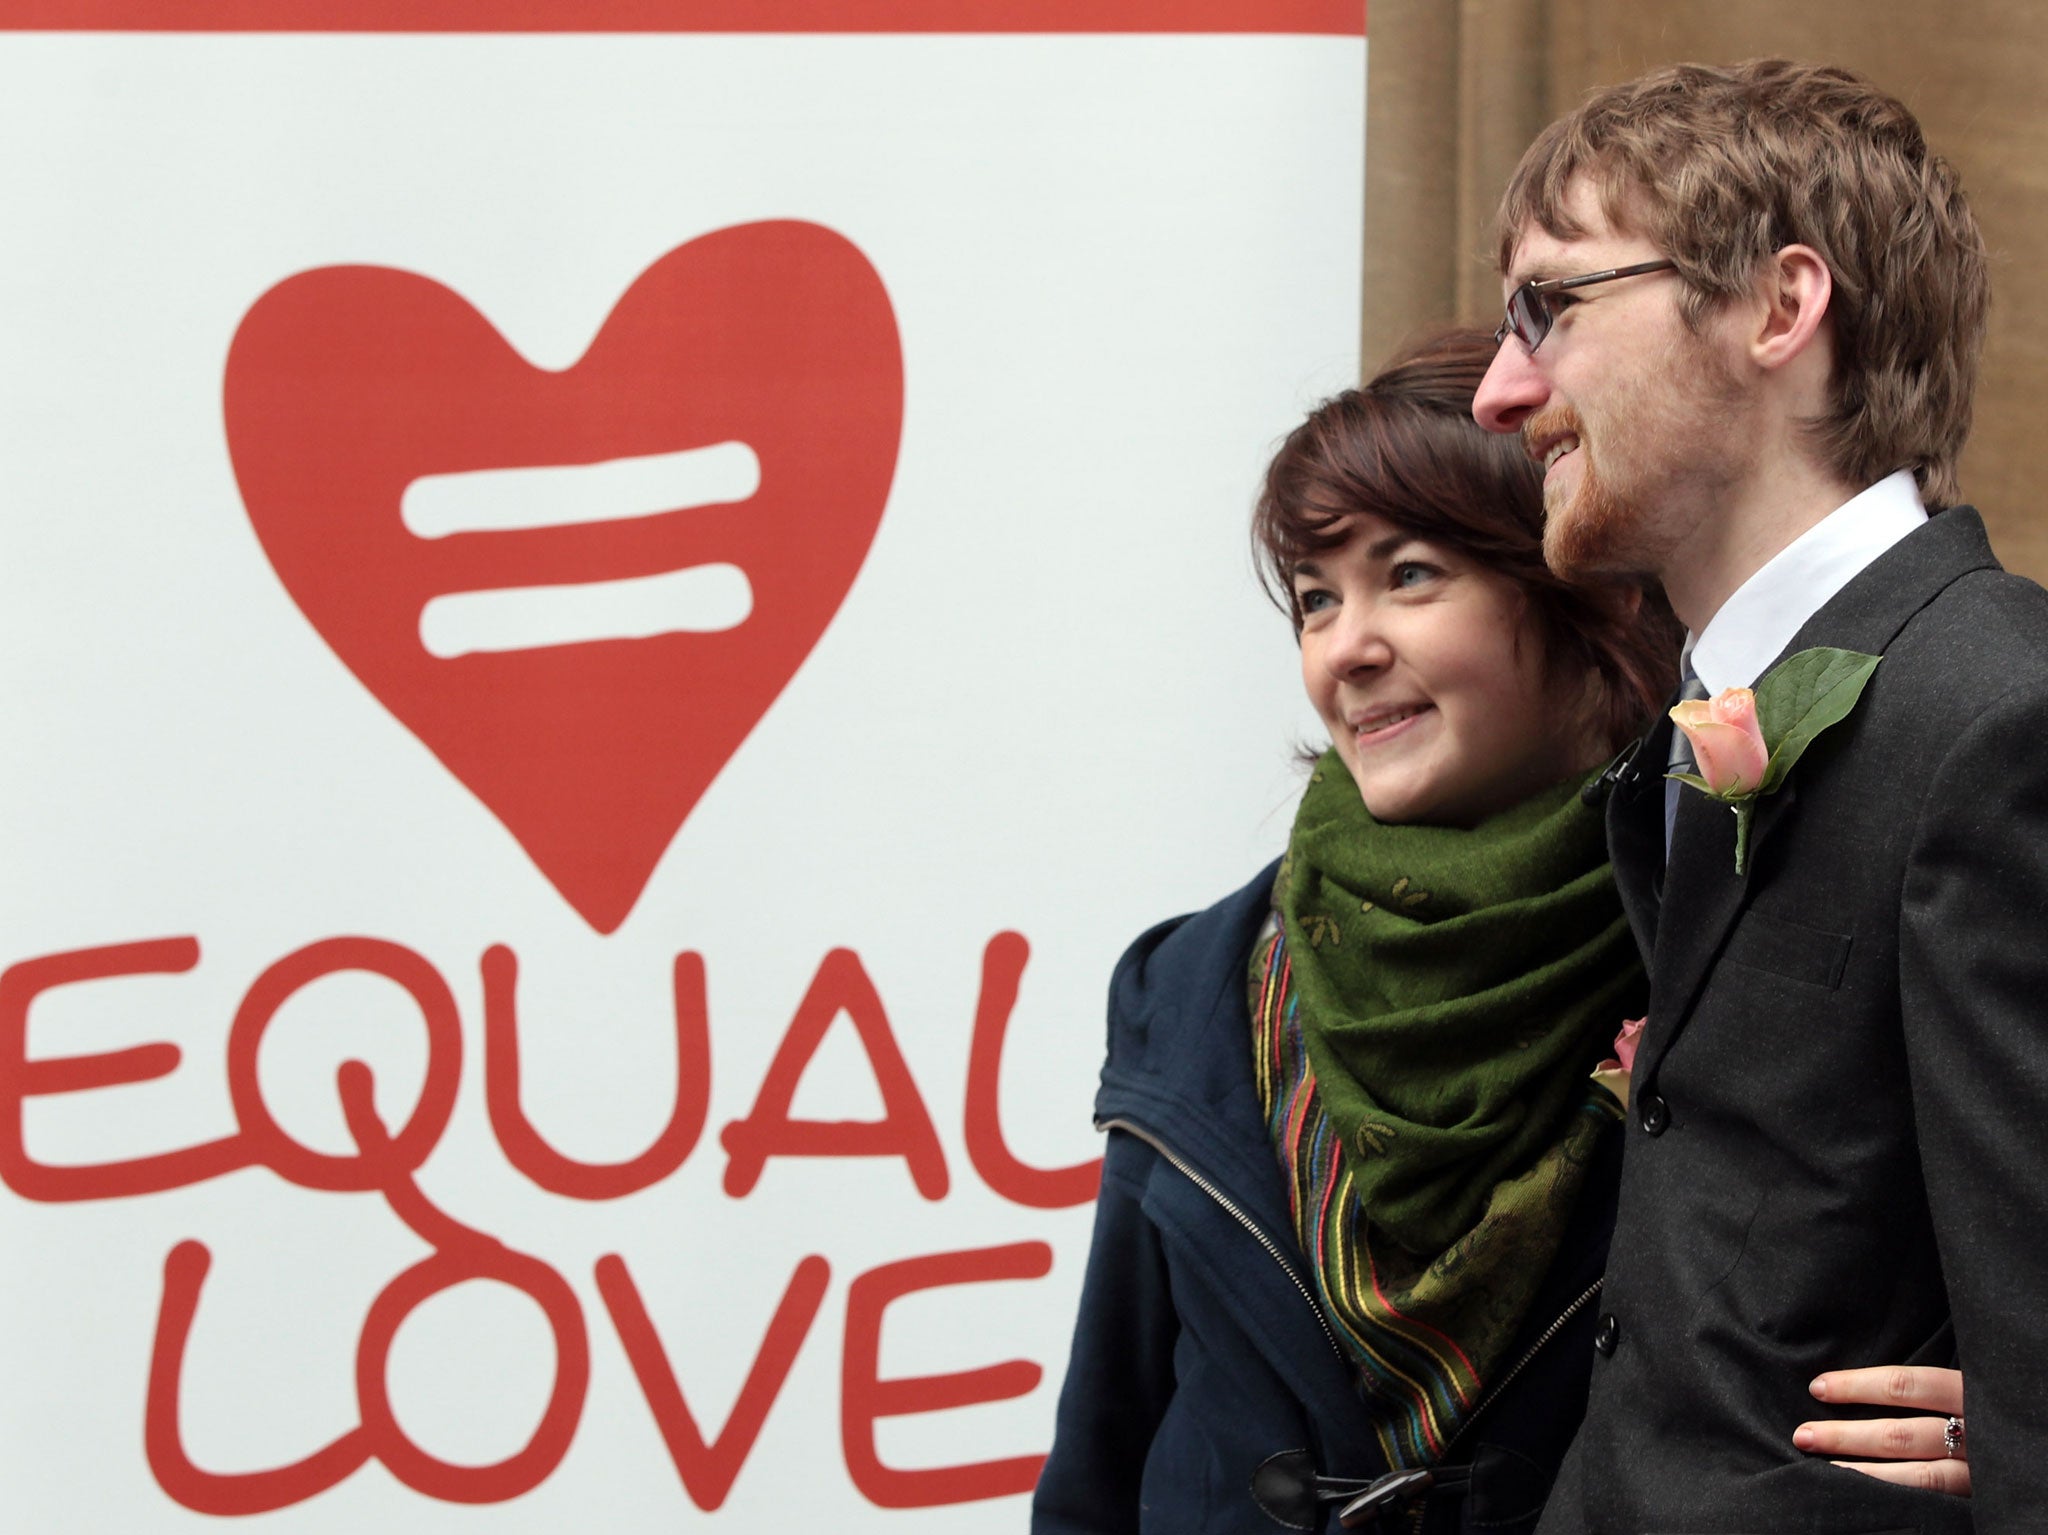 Heterosexual couple, Ian Goggin and Kristin Skarsholt pose for a photograph after being refused a civil partnership outside Bristol Register Office on November 23, 2010 in Bristol, England.